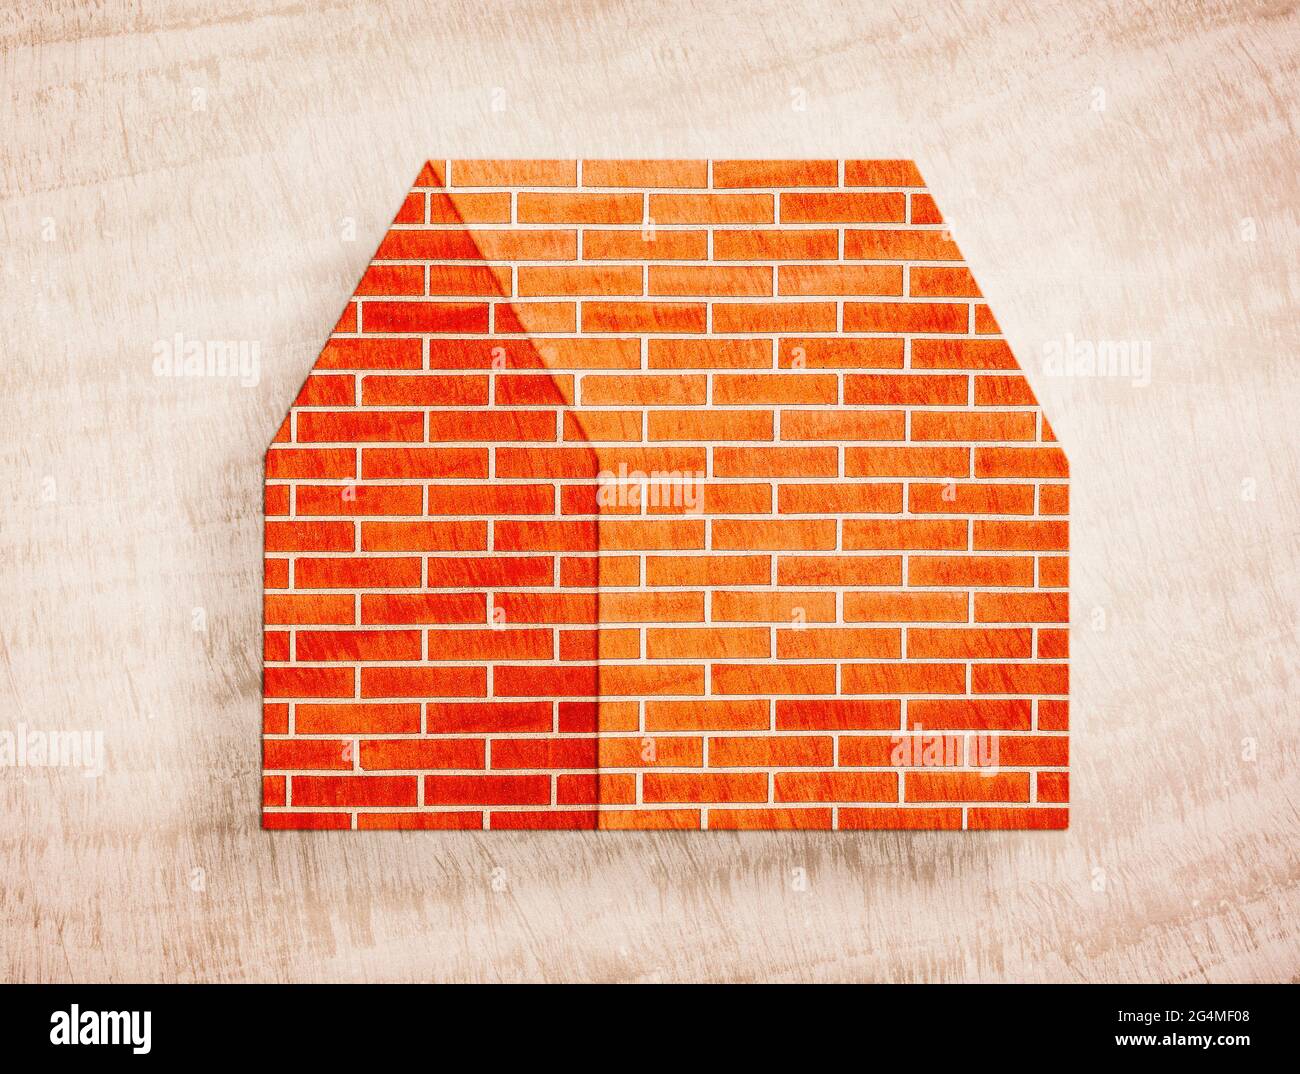 House with red brickwork against a diffuse background Stock Photo